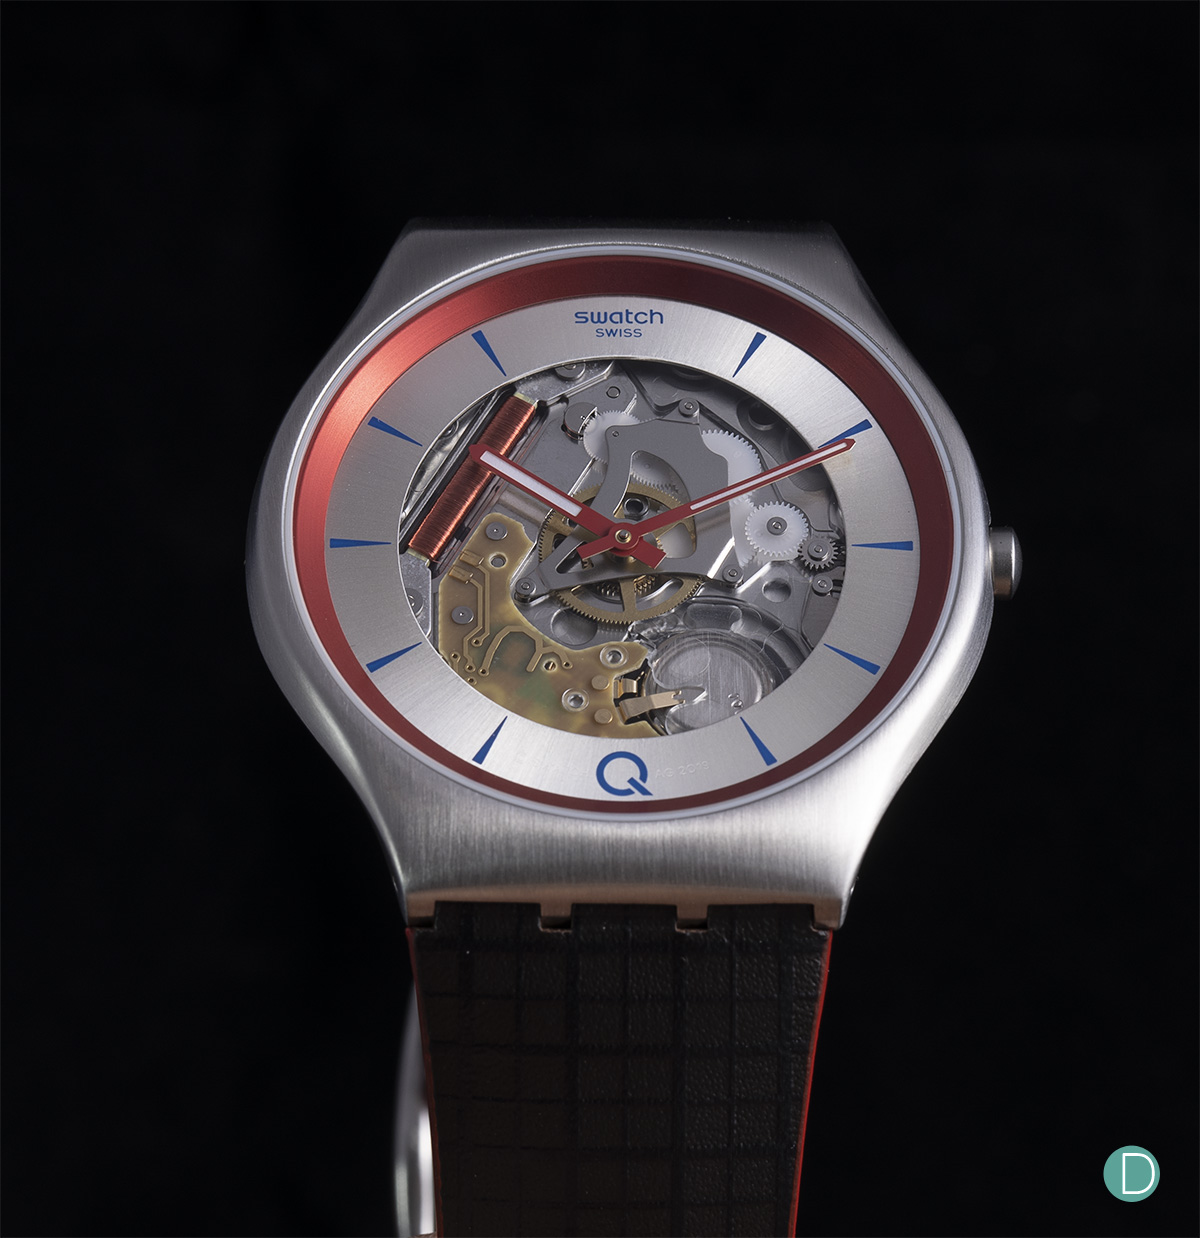 Anders optocht Zo snel als een flits New and reviewed: Swatch Q Watch and six other 007 watches -